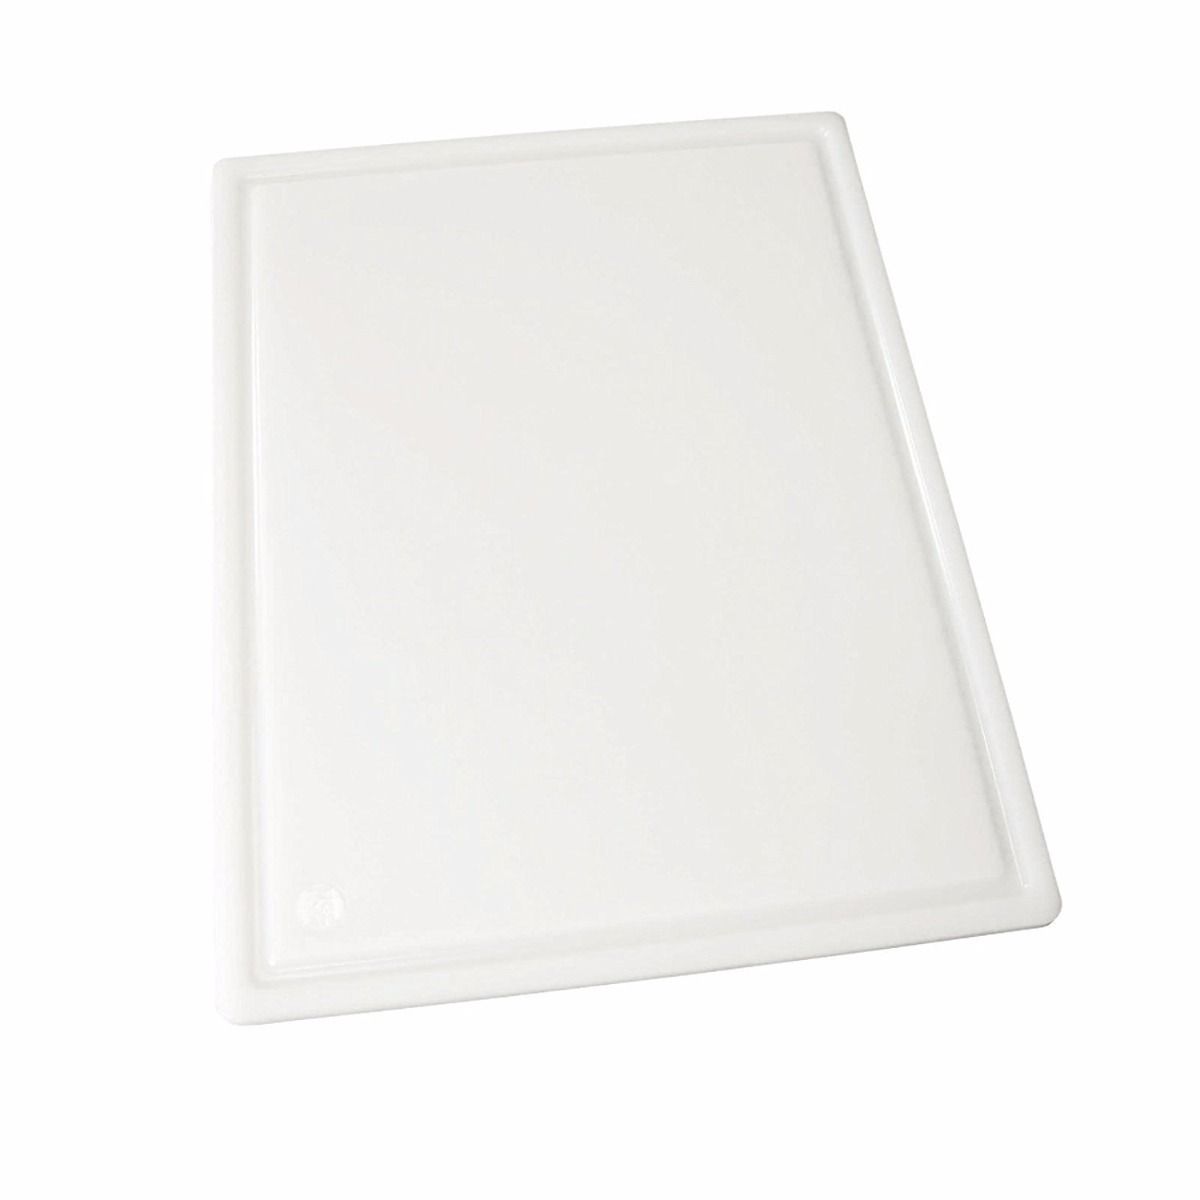 https://static.restaurantsupply.com/media/catalog/product/cache/58705eee992a0d7bab305099af29f9ee/1/8/18-x-24-x-1-white-poly-cutting-board-grooved.jpg